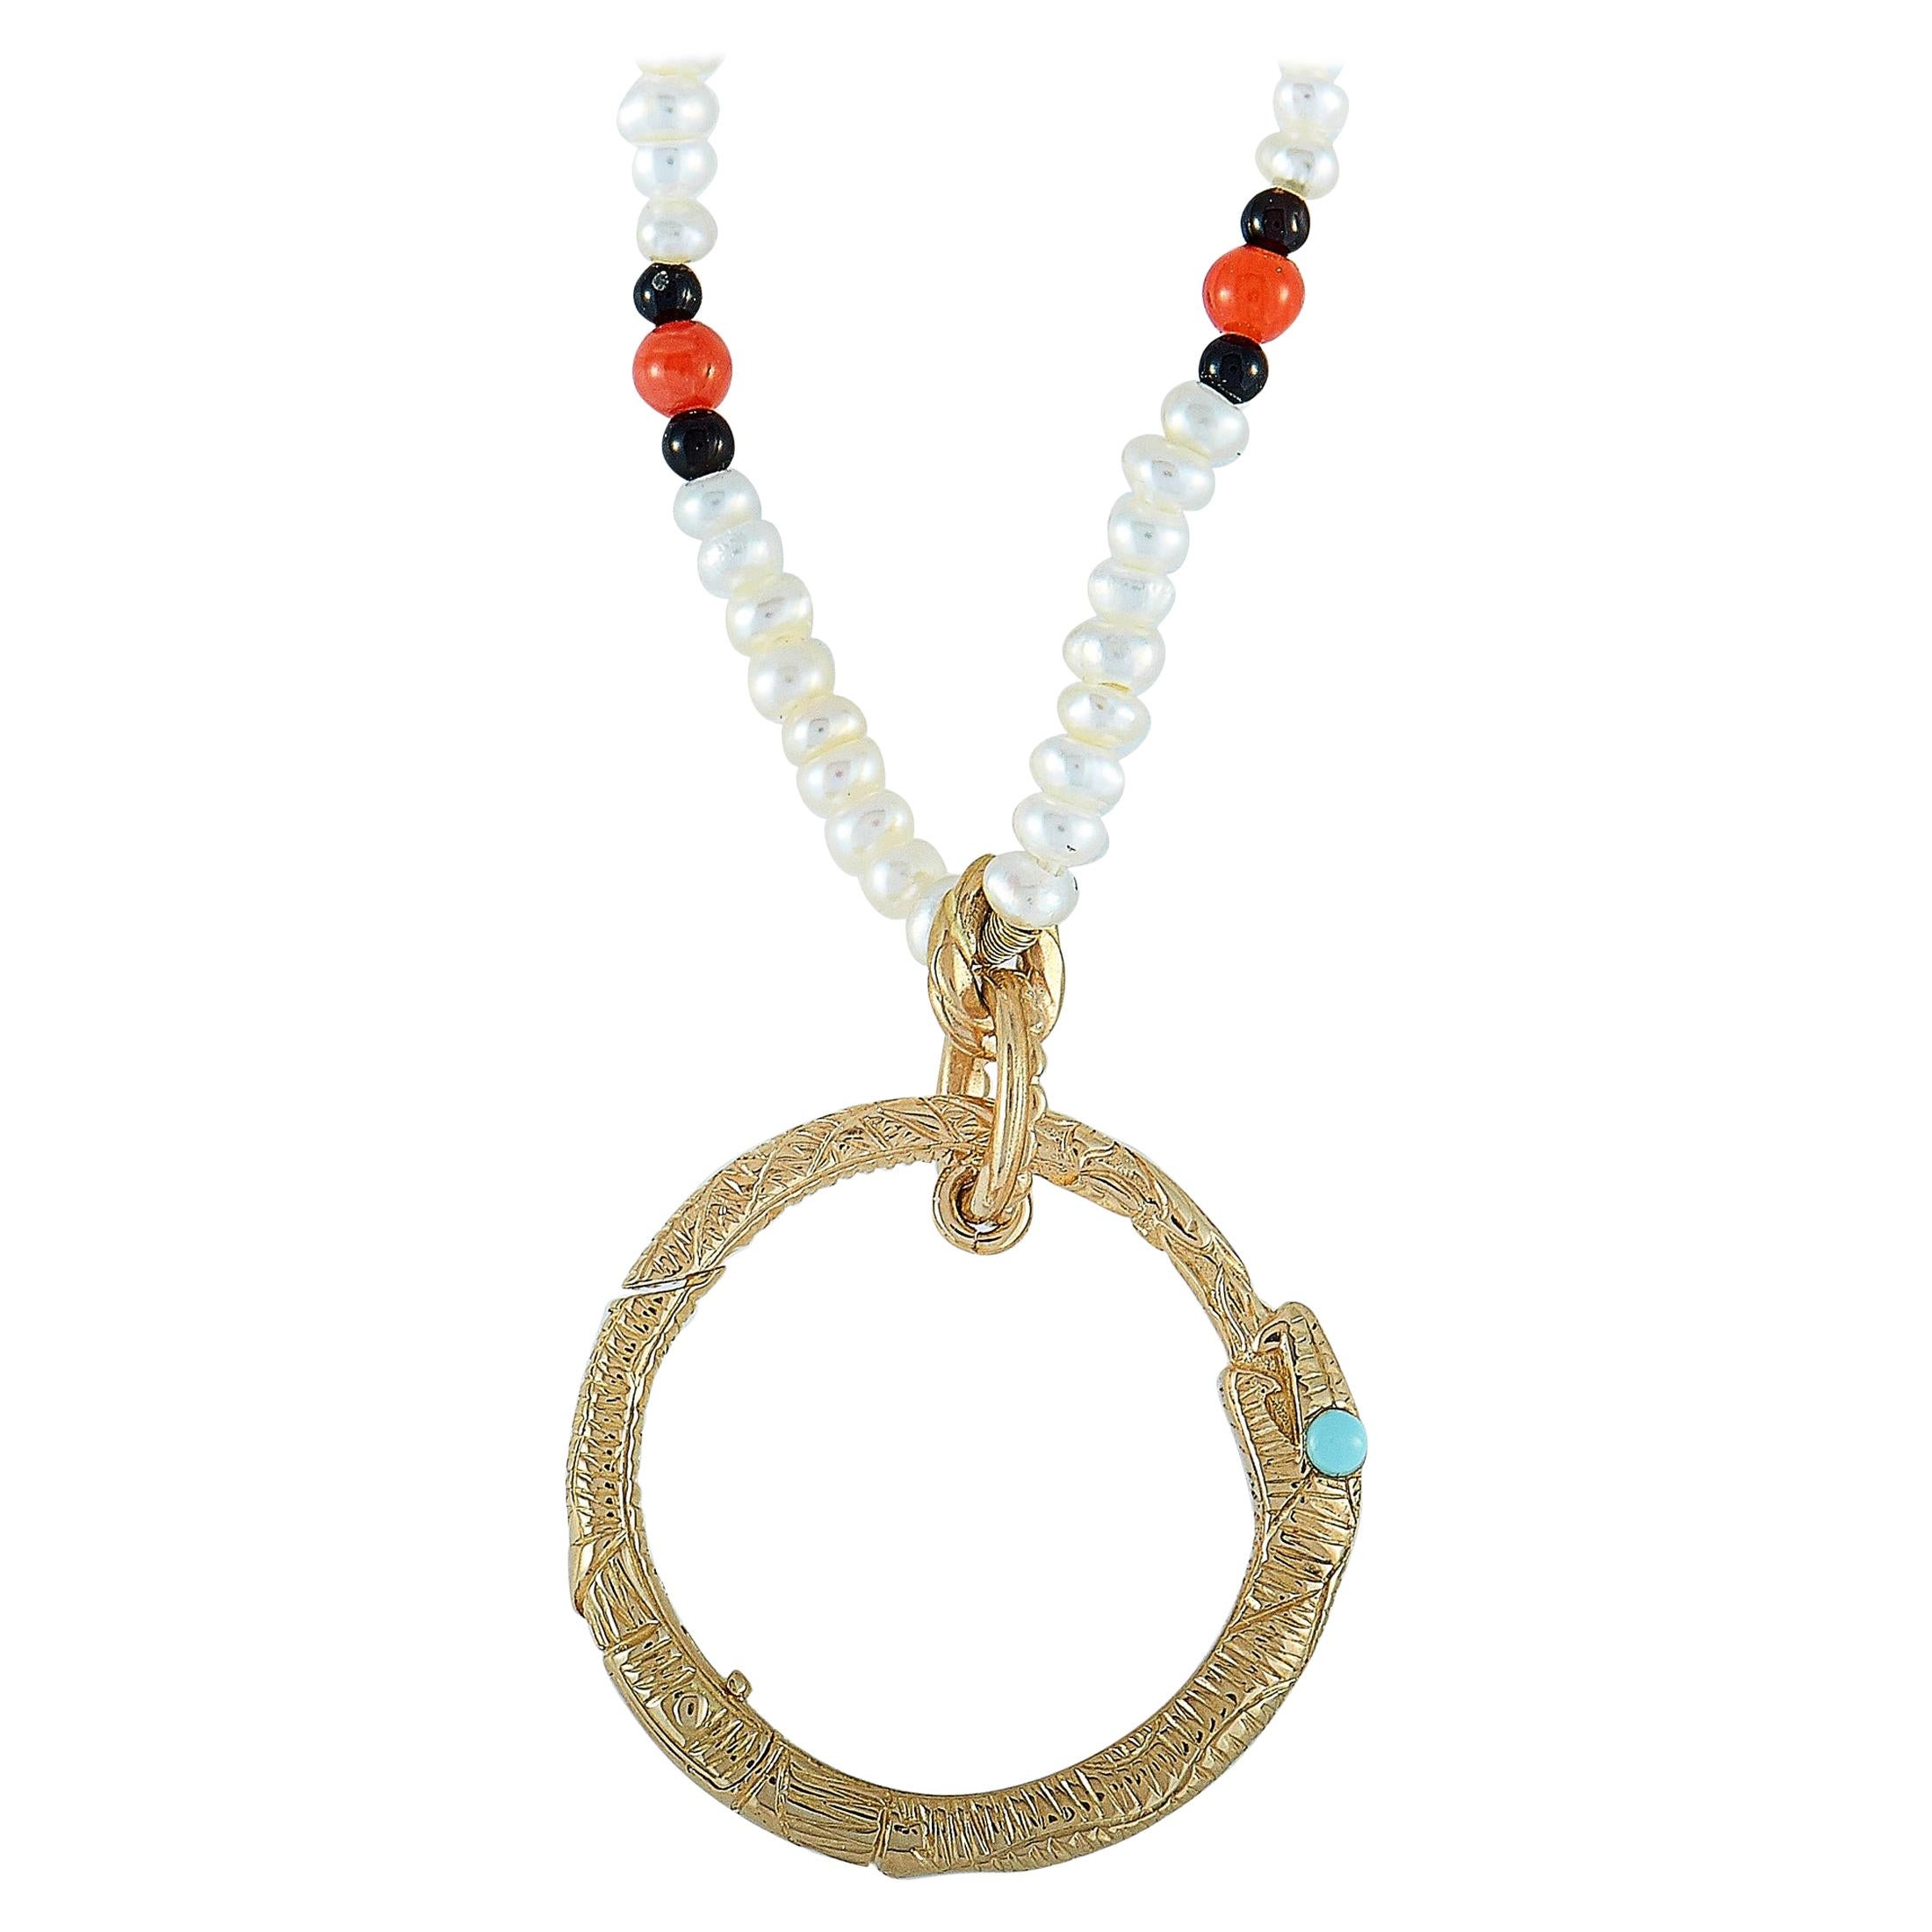 Gucci Ouroboros 18 Karat Gold Pearl, Turquoise, Coral and Onyx Beads Snake